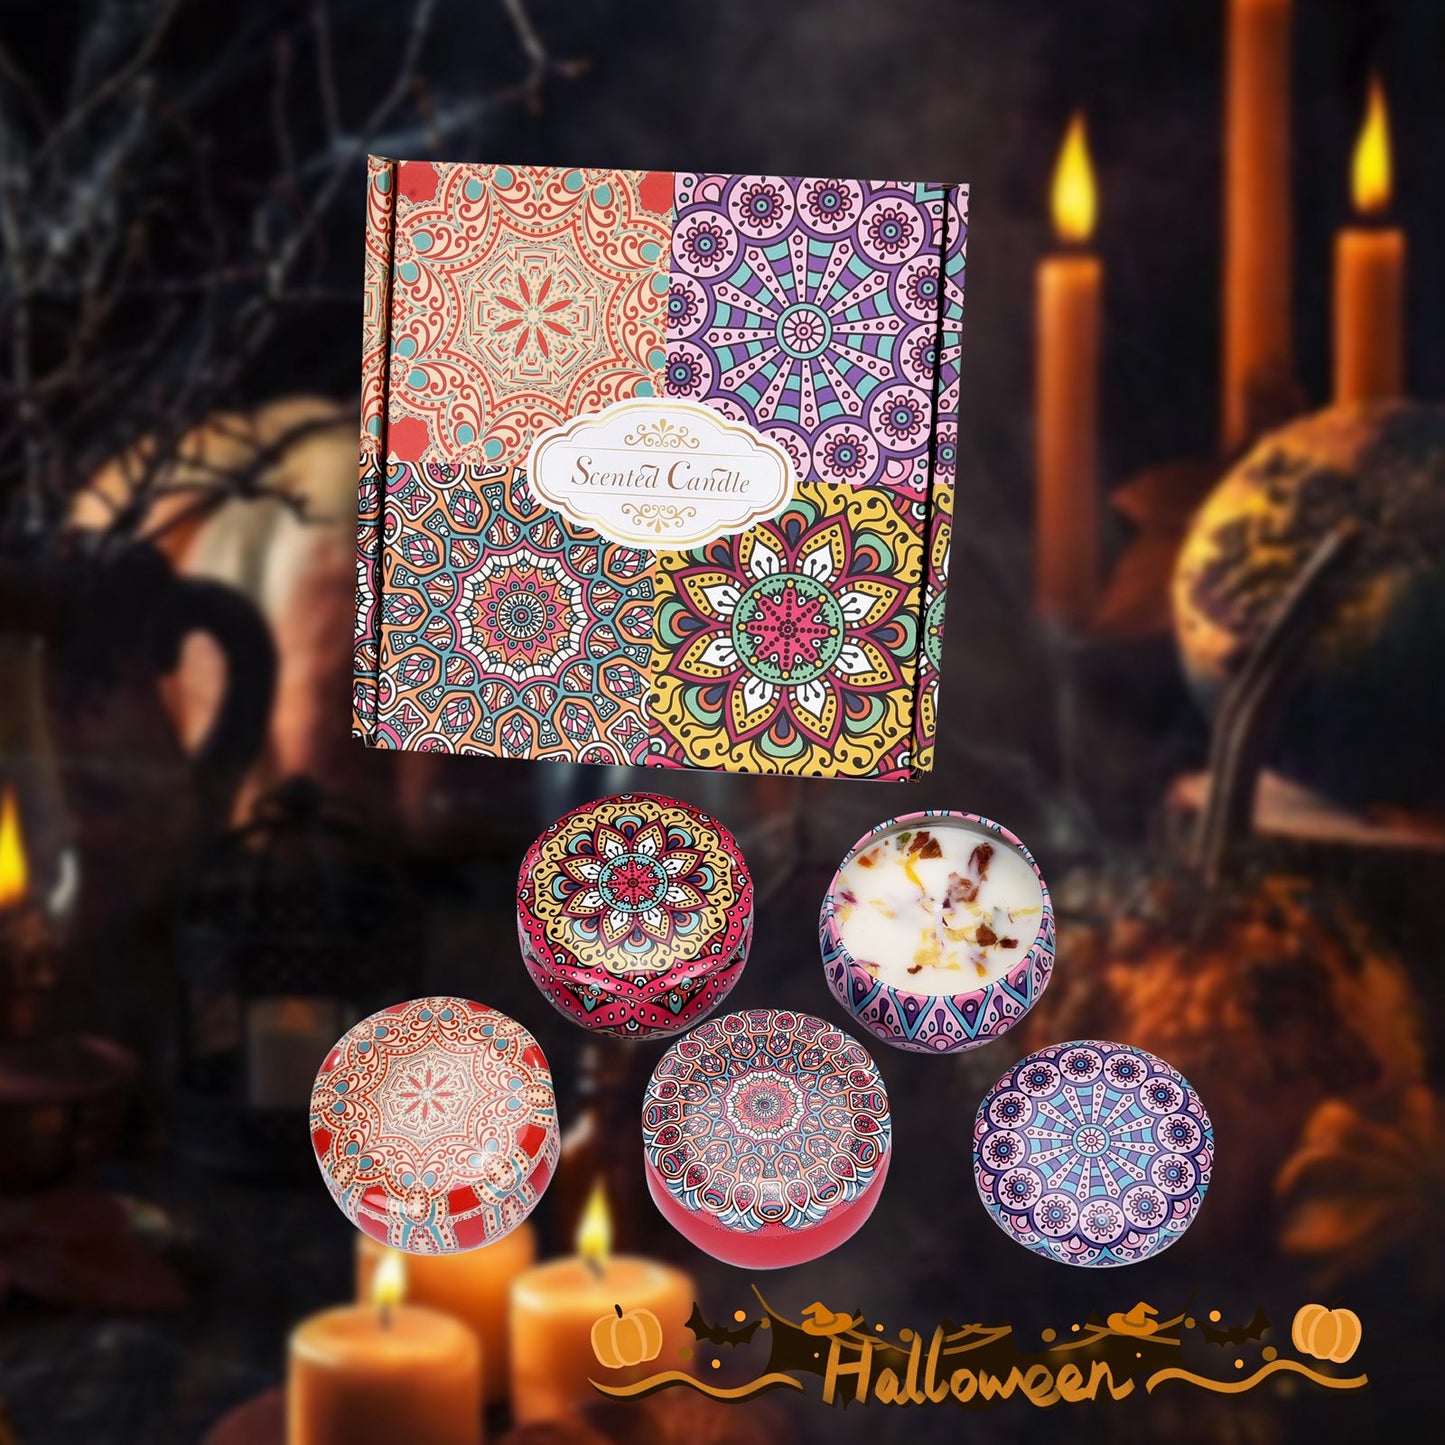 Halloween scented candle gift set 4-pack